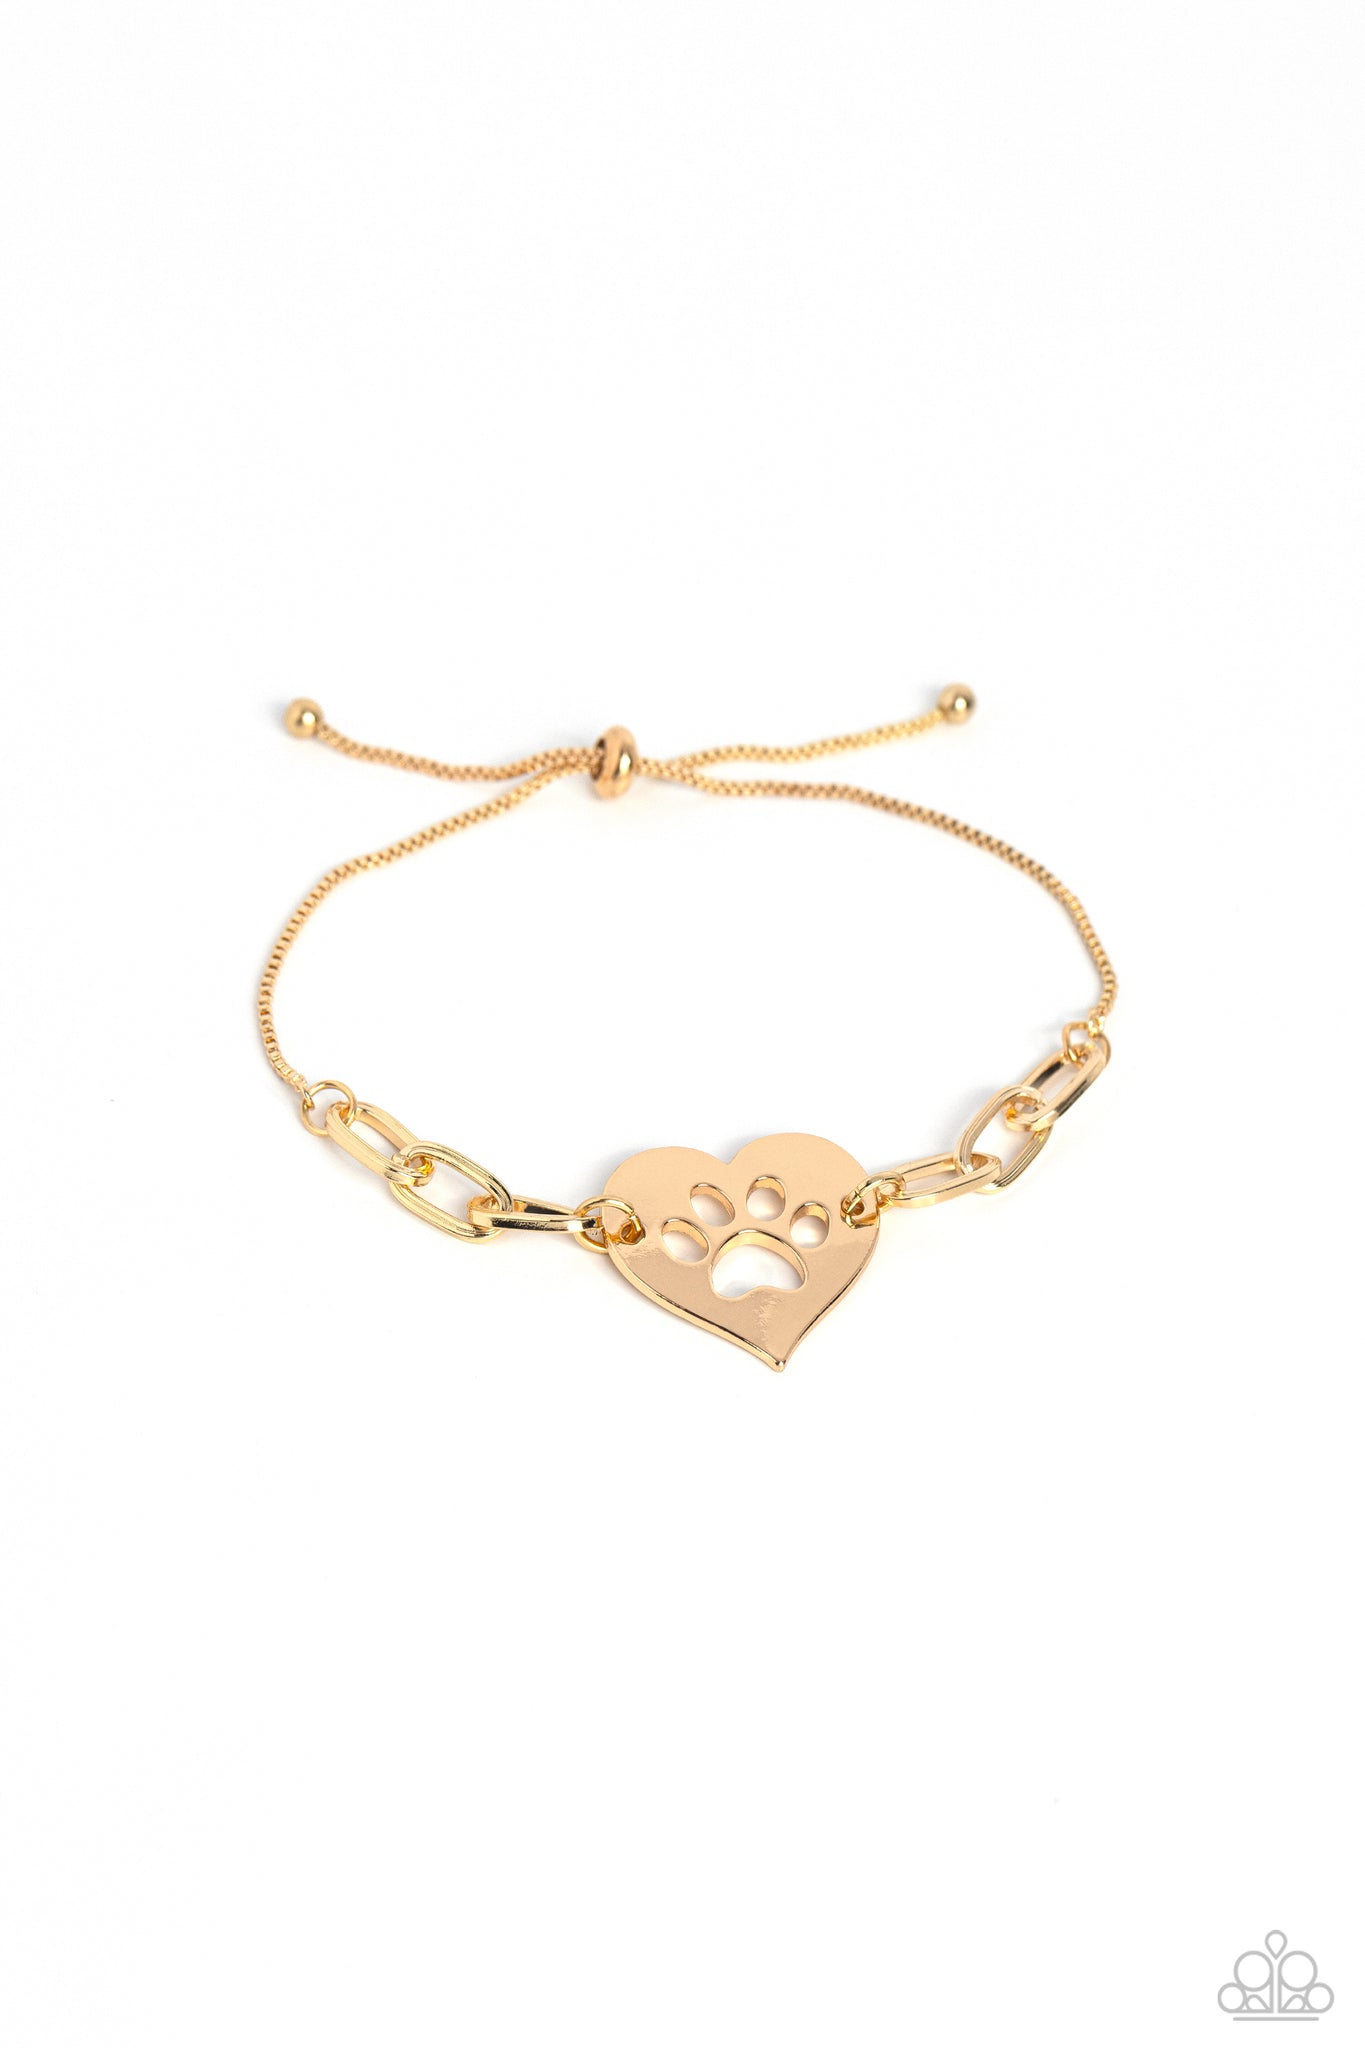 PAW-sitively Perfect Bracelet (Silver, Gold)